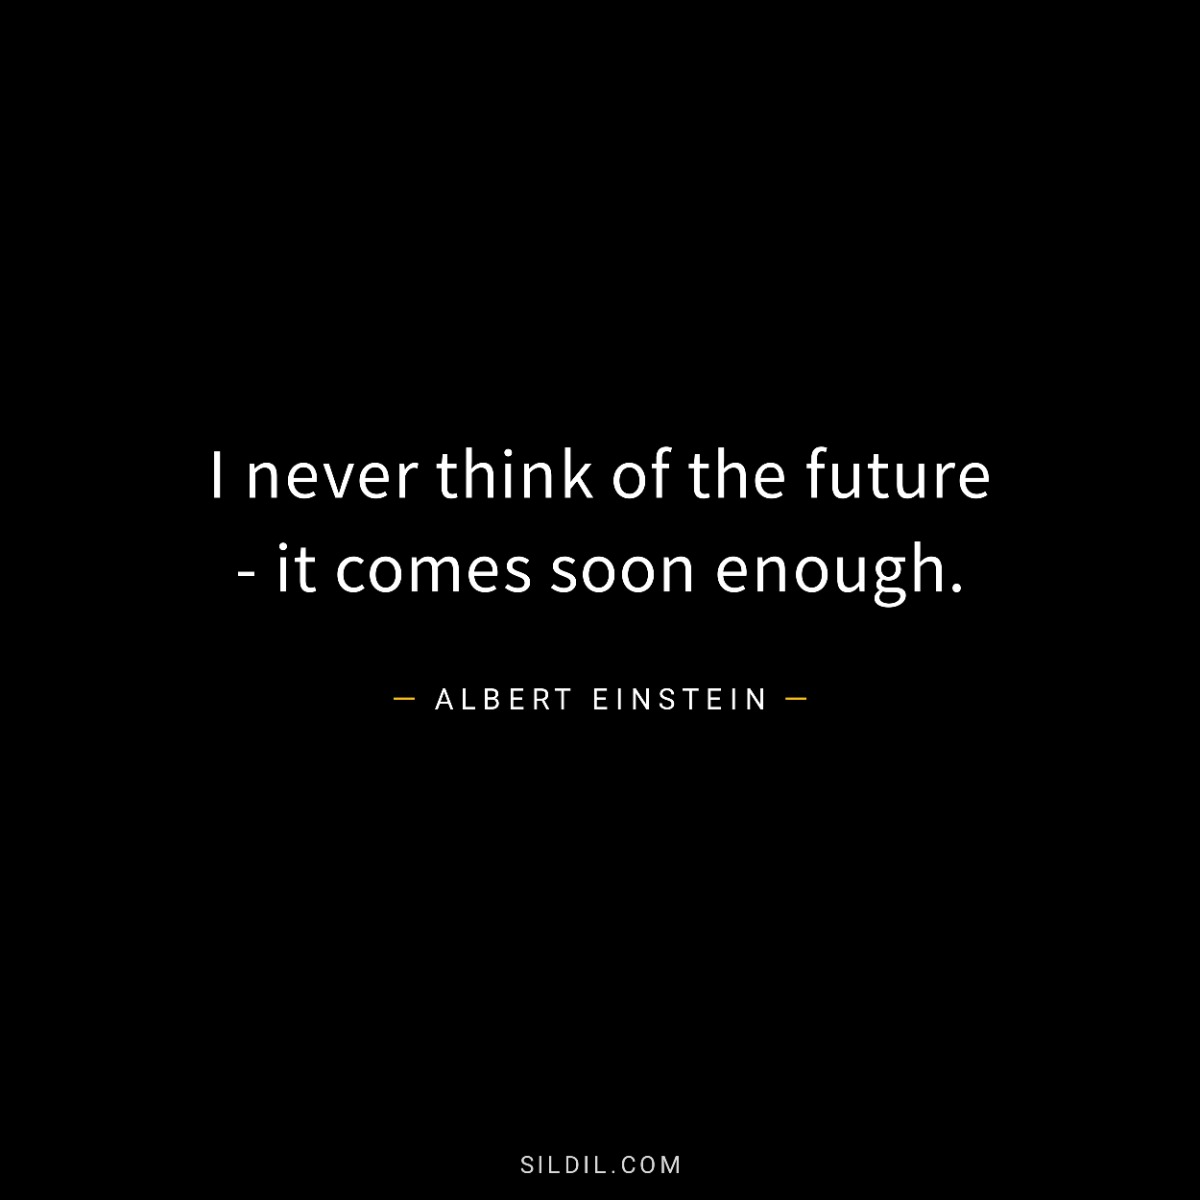 I never think of the future - it comes soon enough.